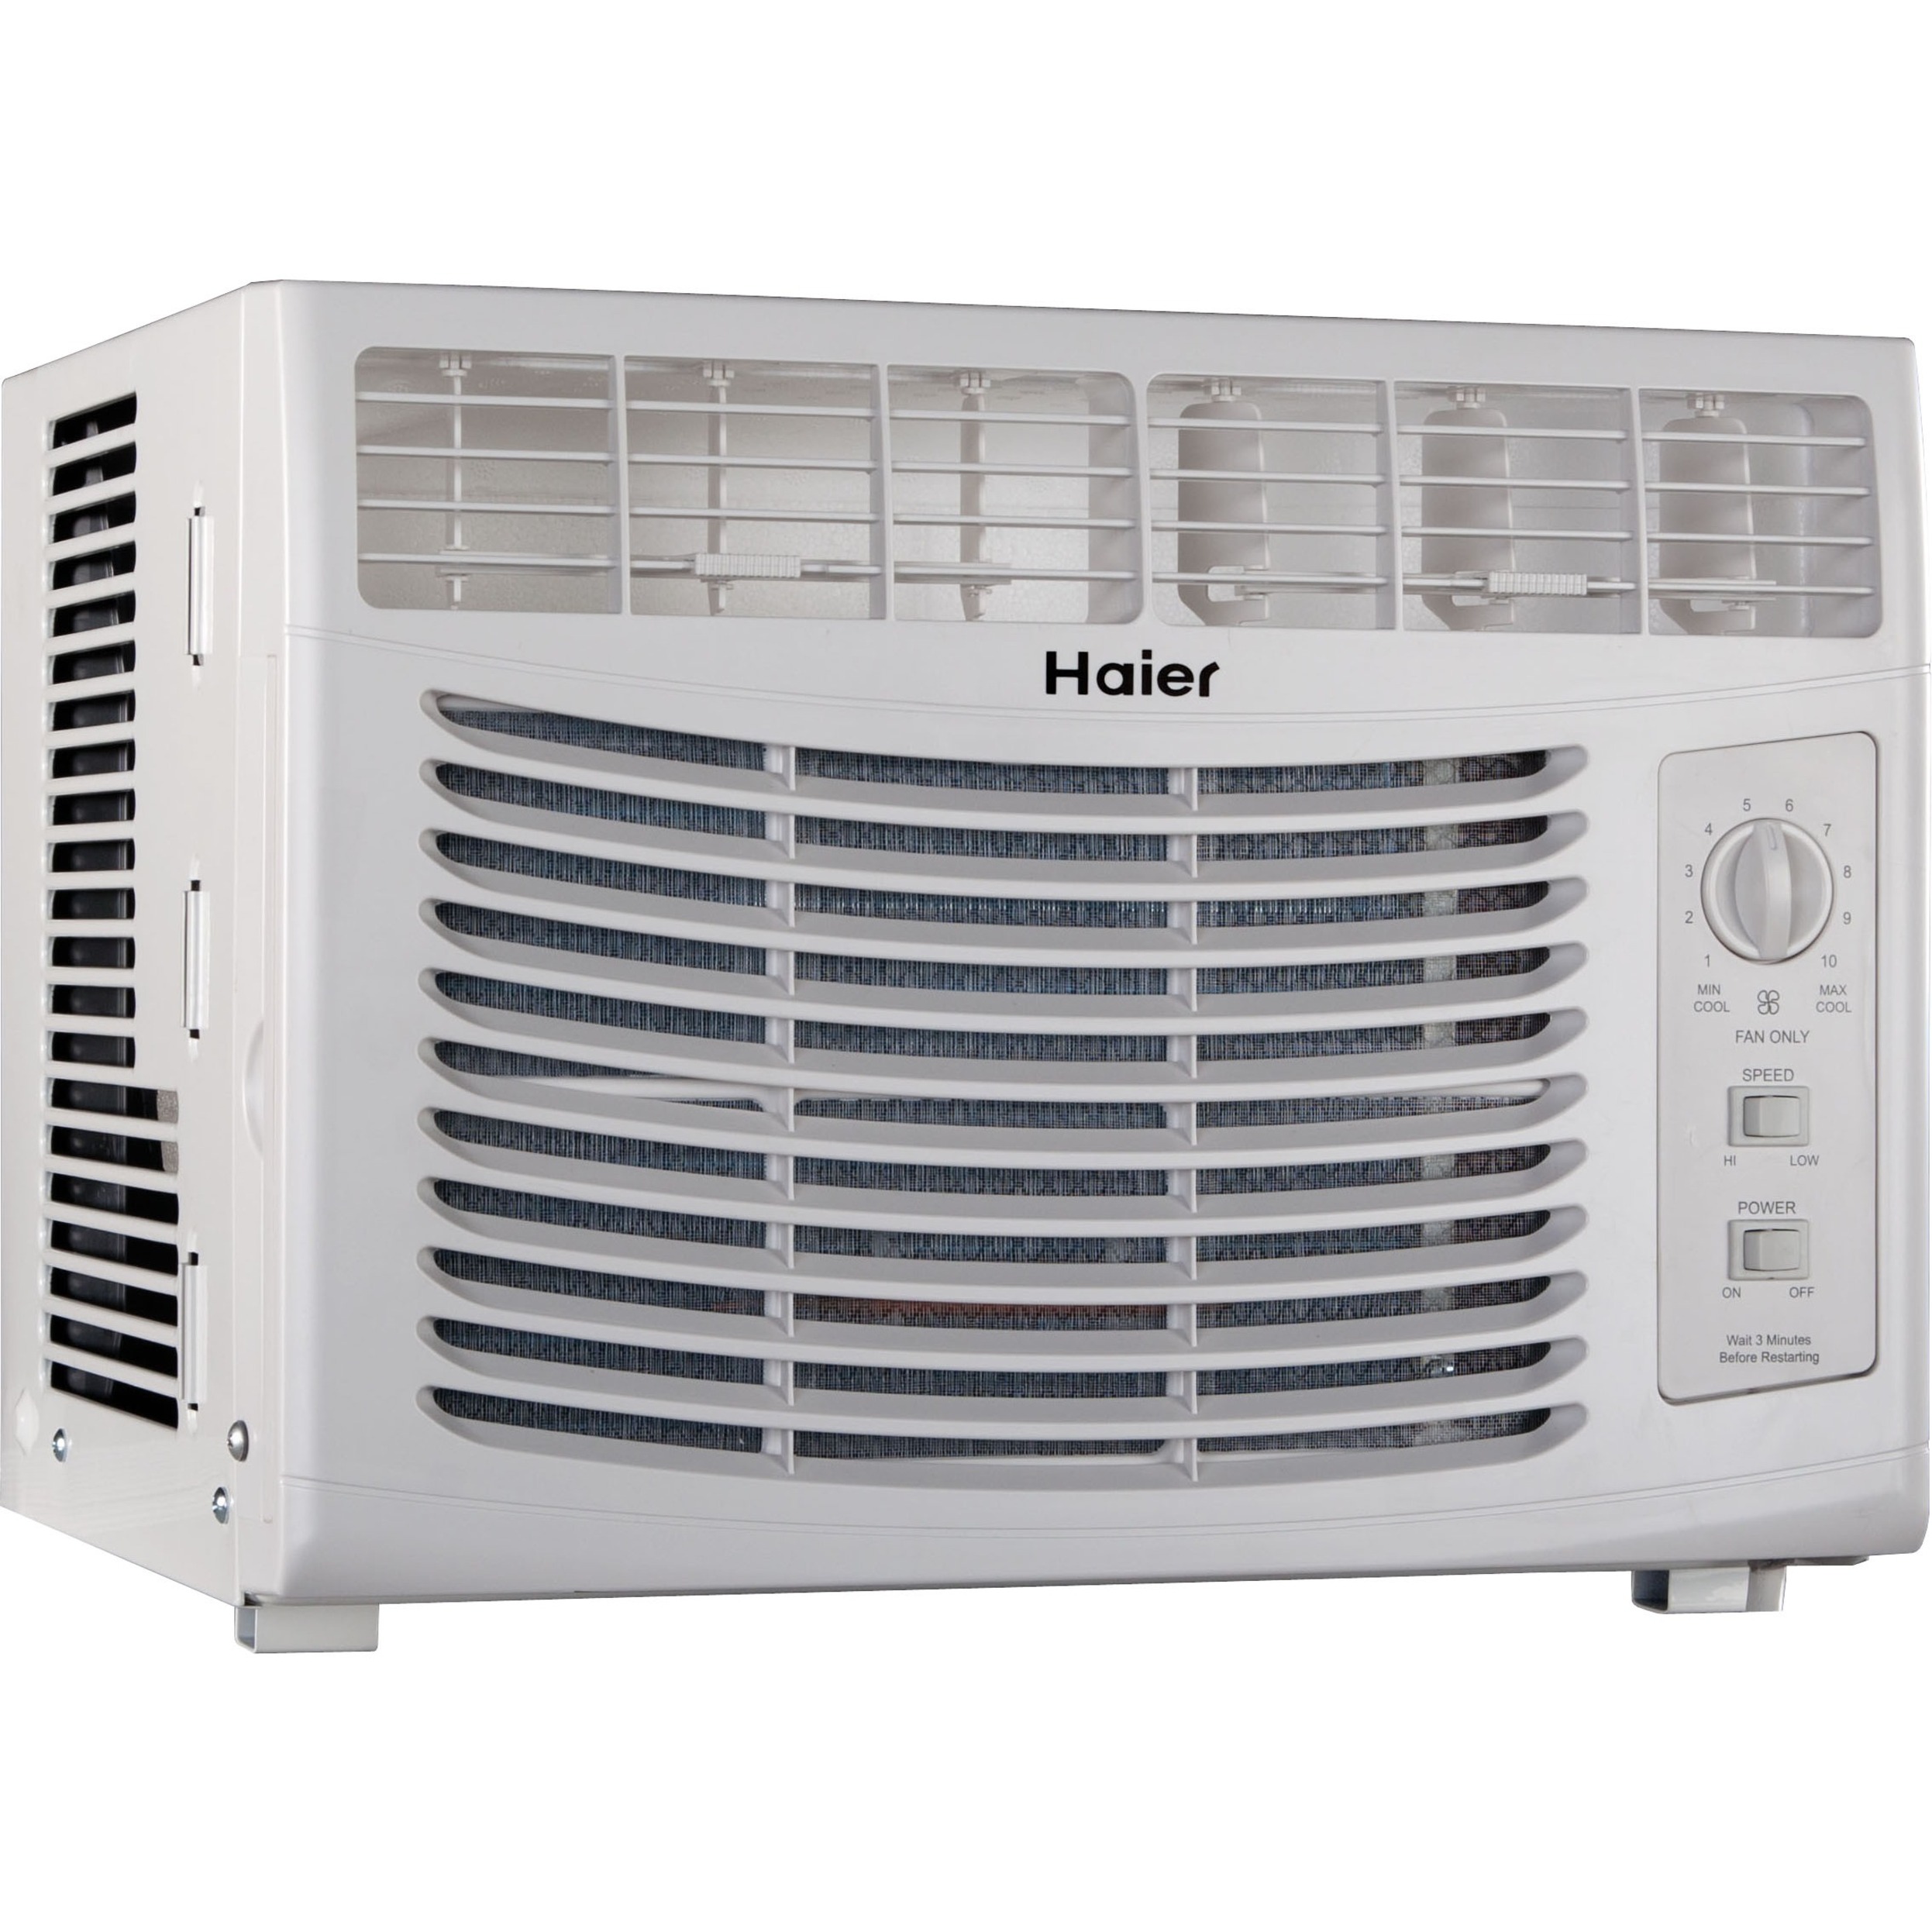 Haier HWF05XCL-L 5,000 BTU 115V Window-Mounted Air Conditioner with Mechanical Controls - image 4 of 5